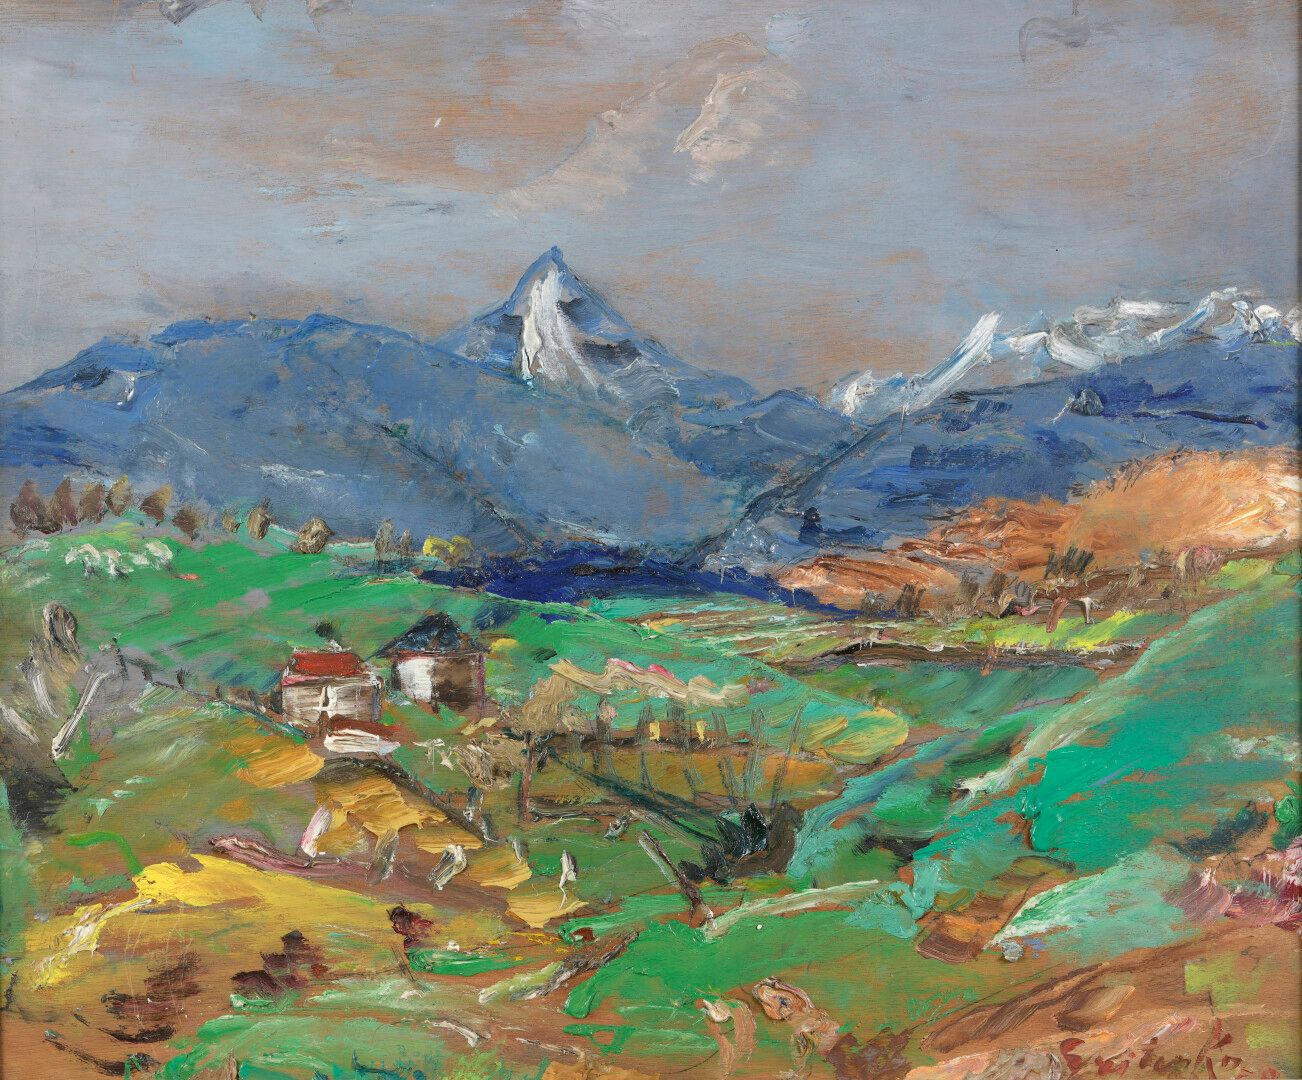 Null Alexis GRITCHENKO (1883-1977). The Matterhorn from the valley

Oil on panel&hellip;